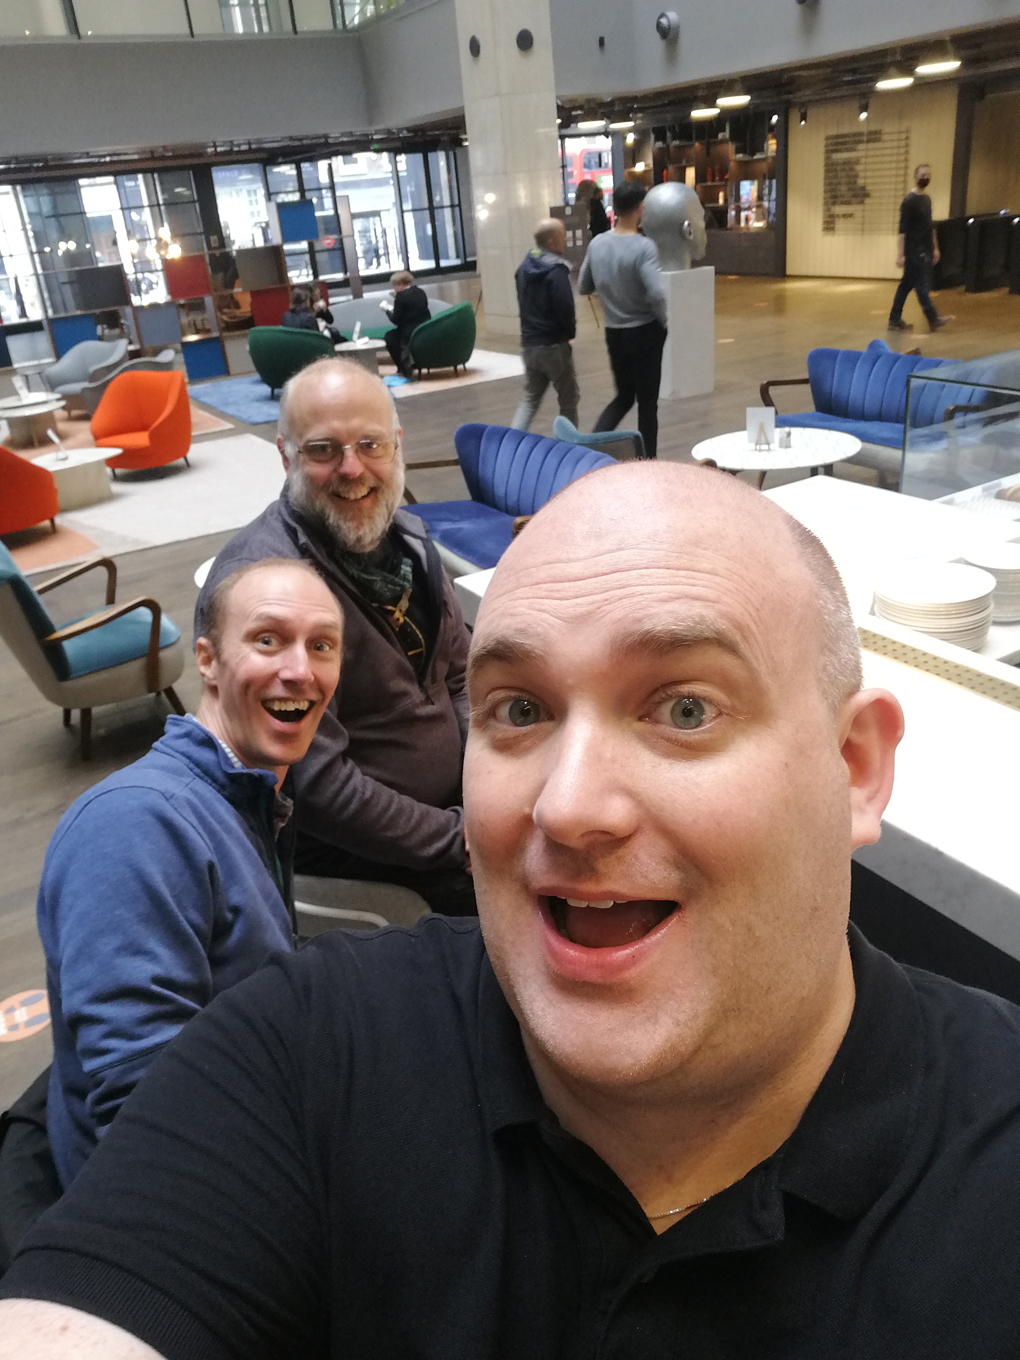 Me and two men sitting at a coffee bar in an office building